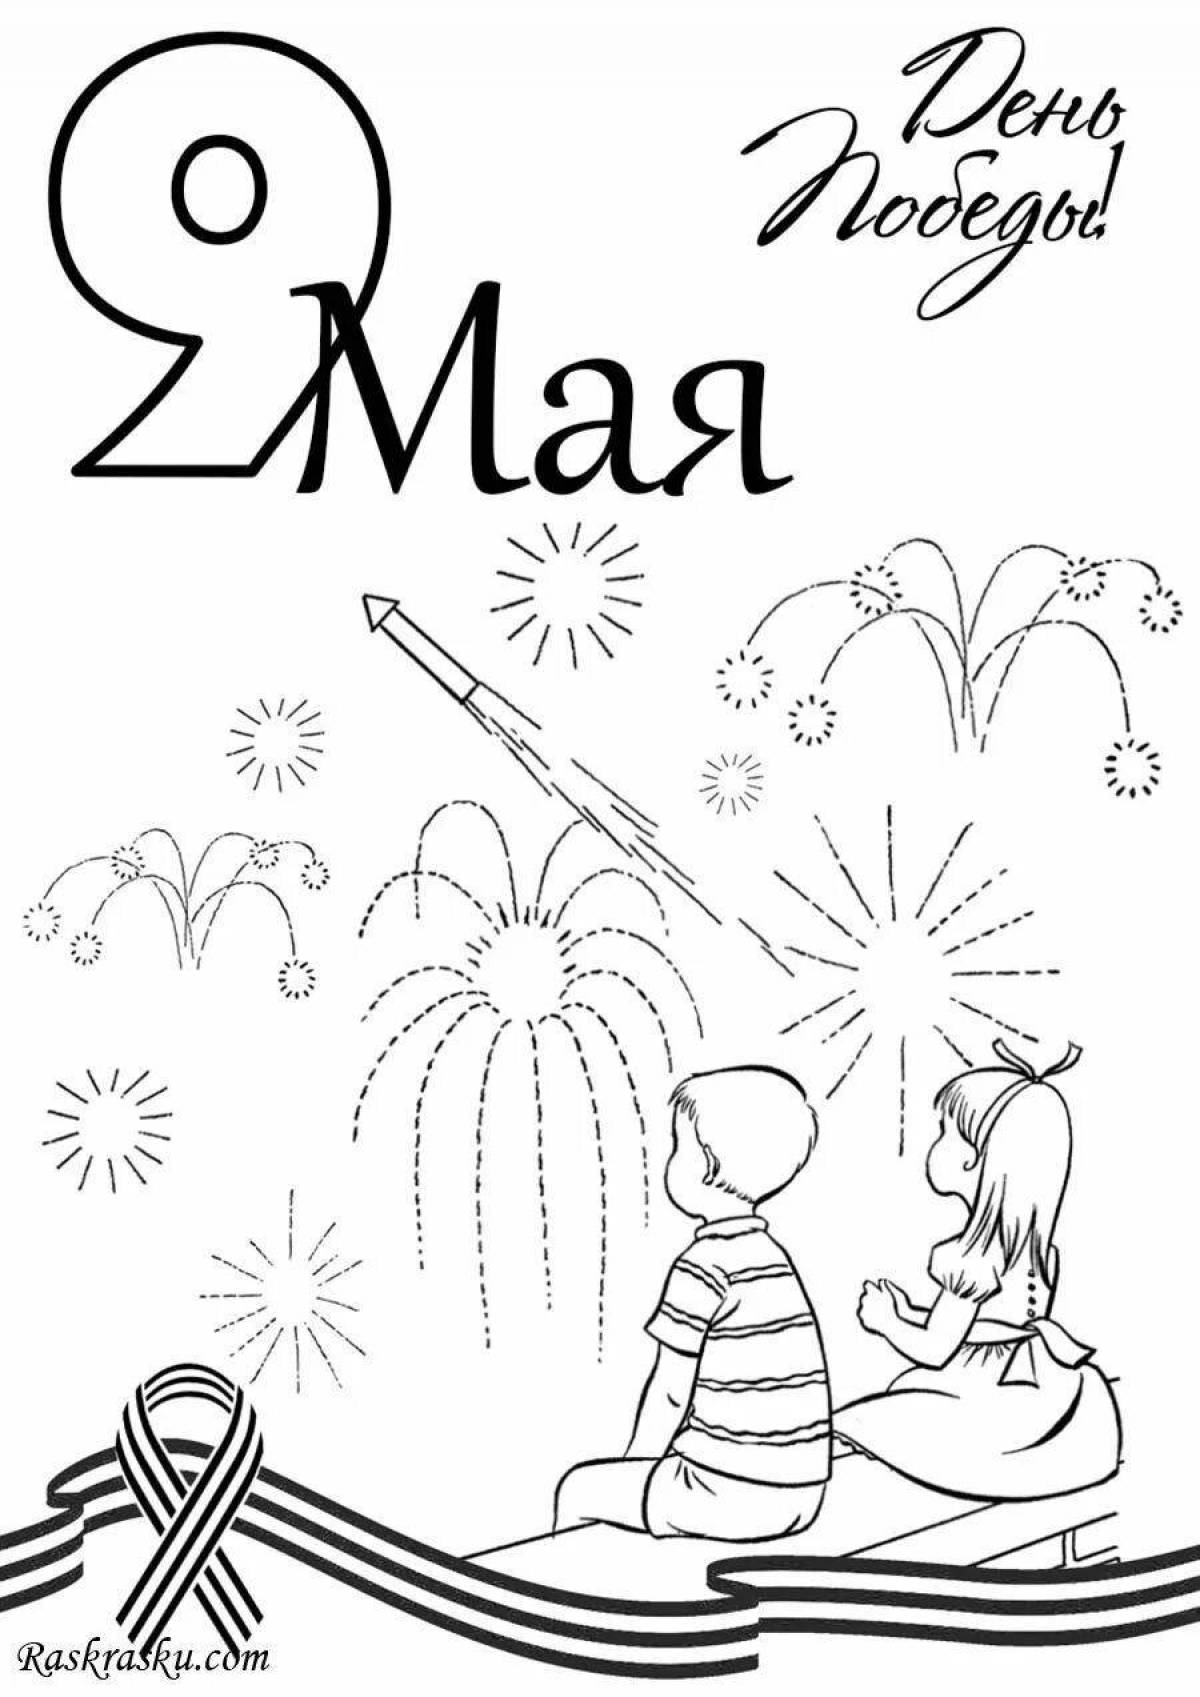 Victory day coloring book for kids